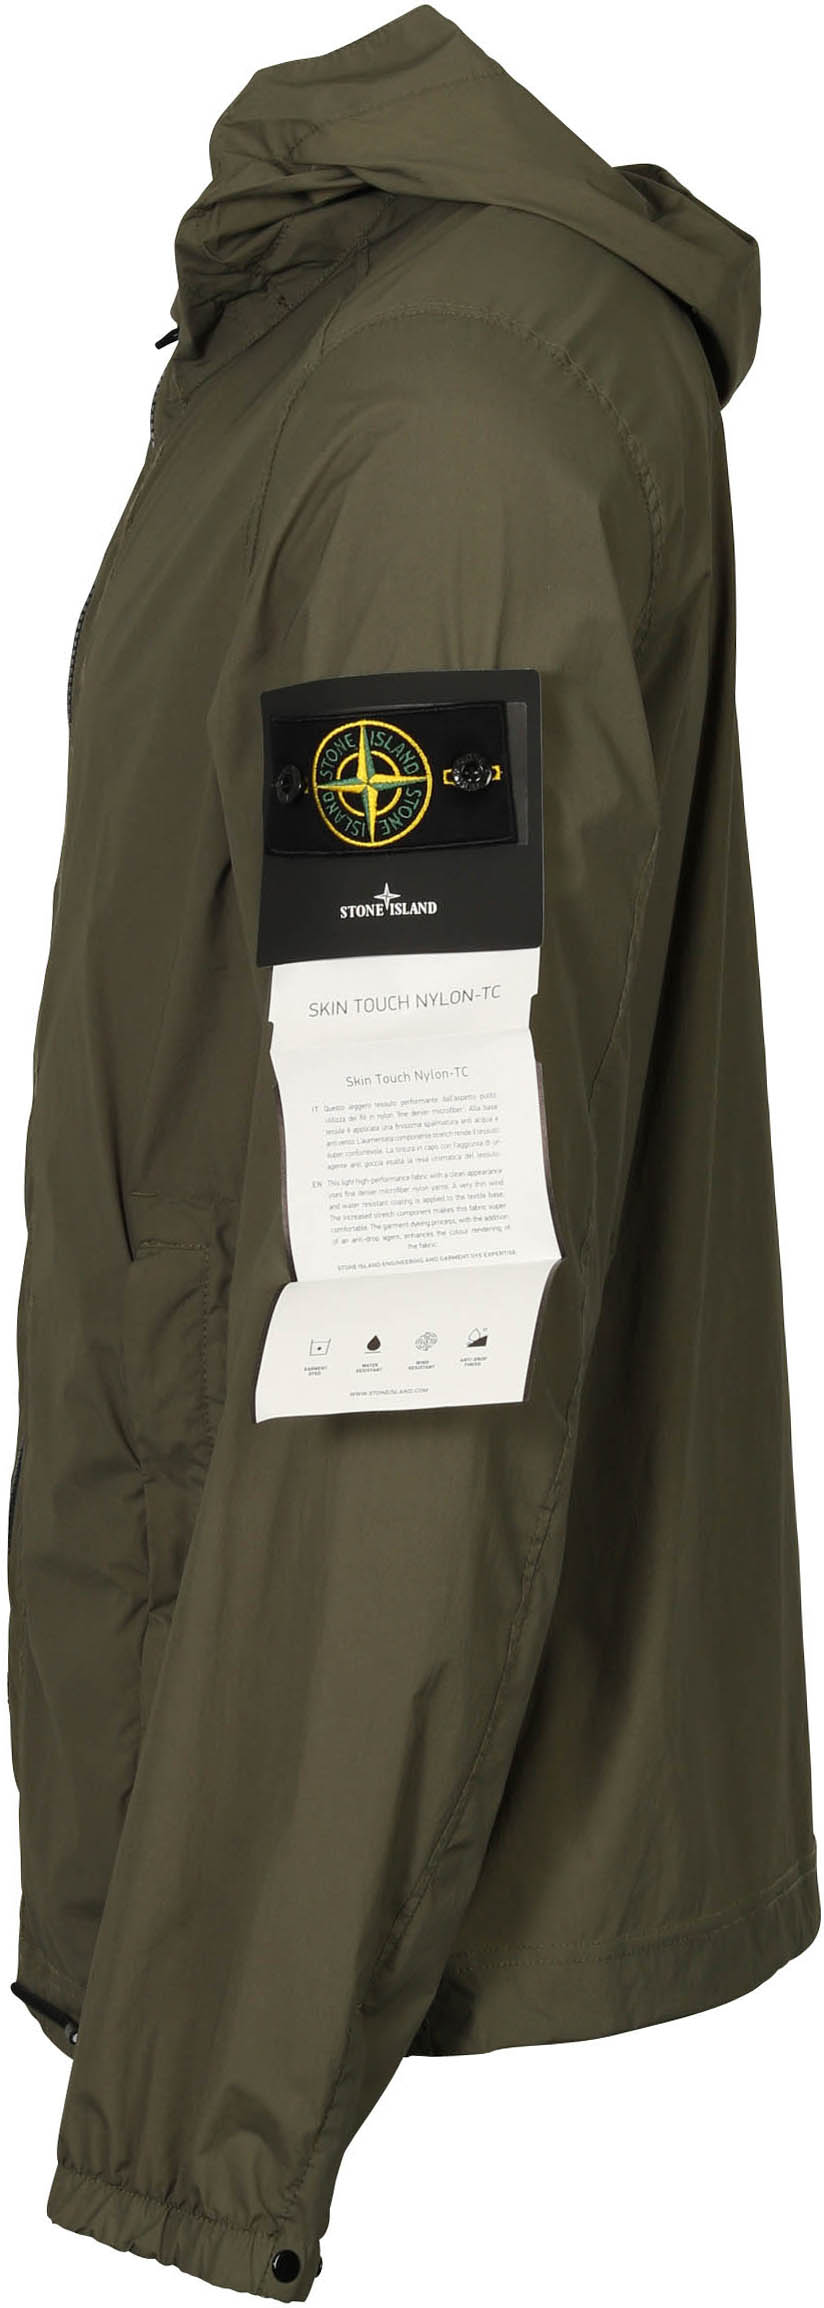 Stone Island Packable Jacket Olive XL